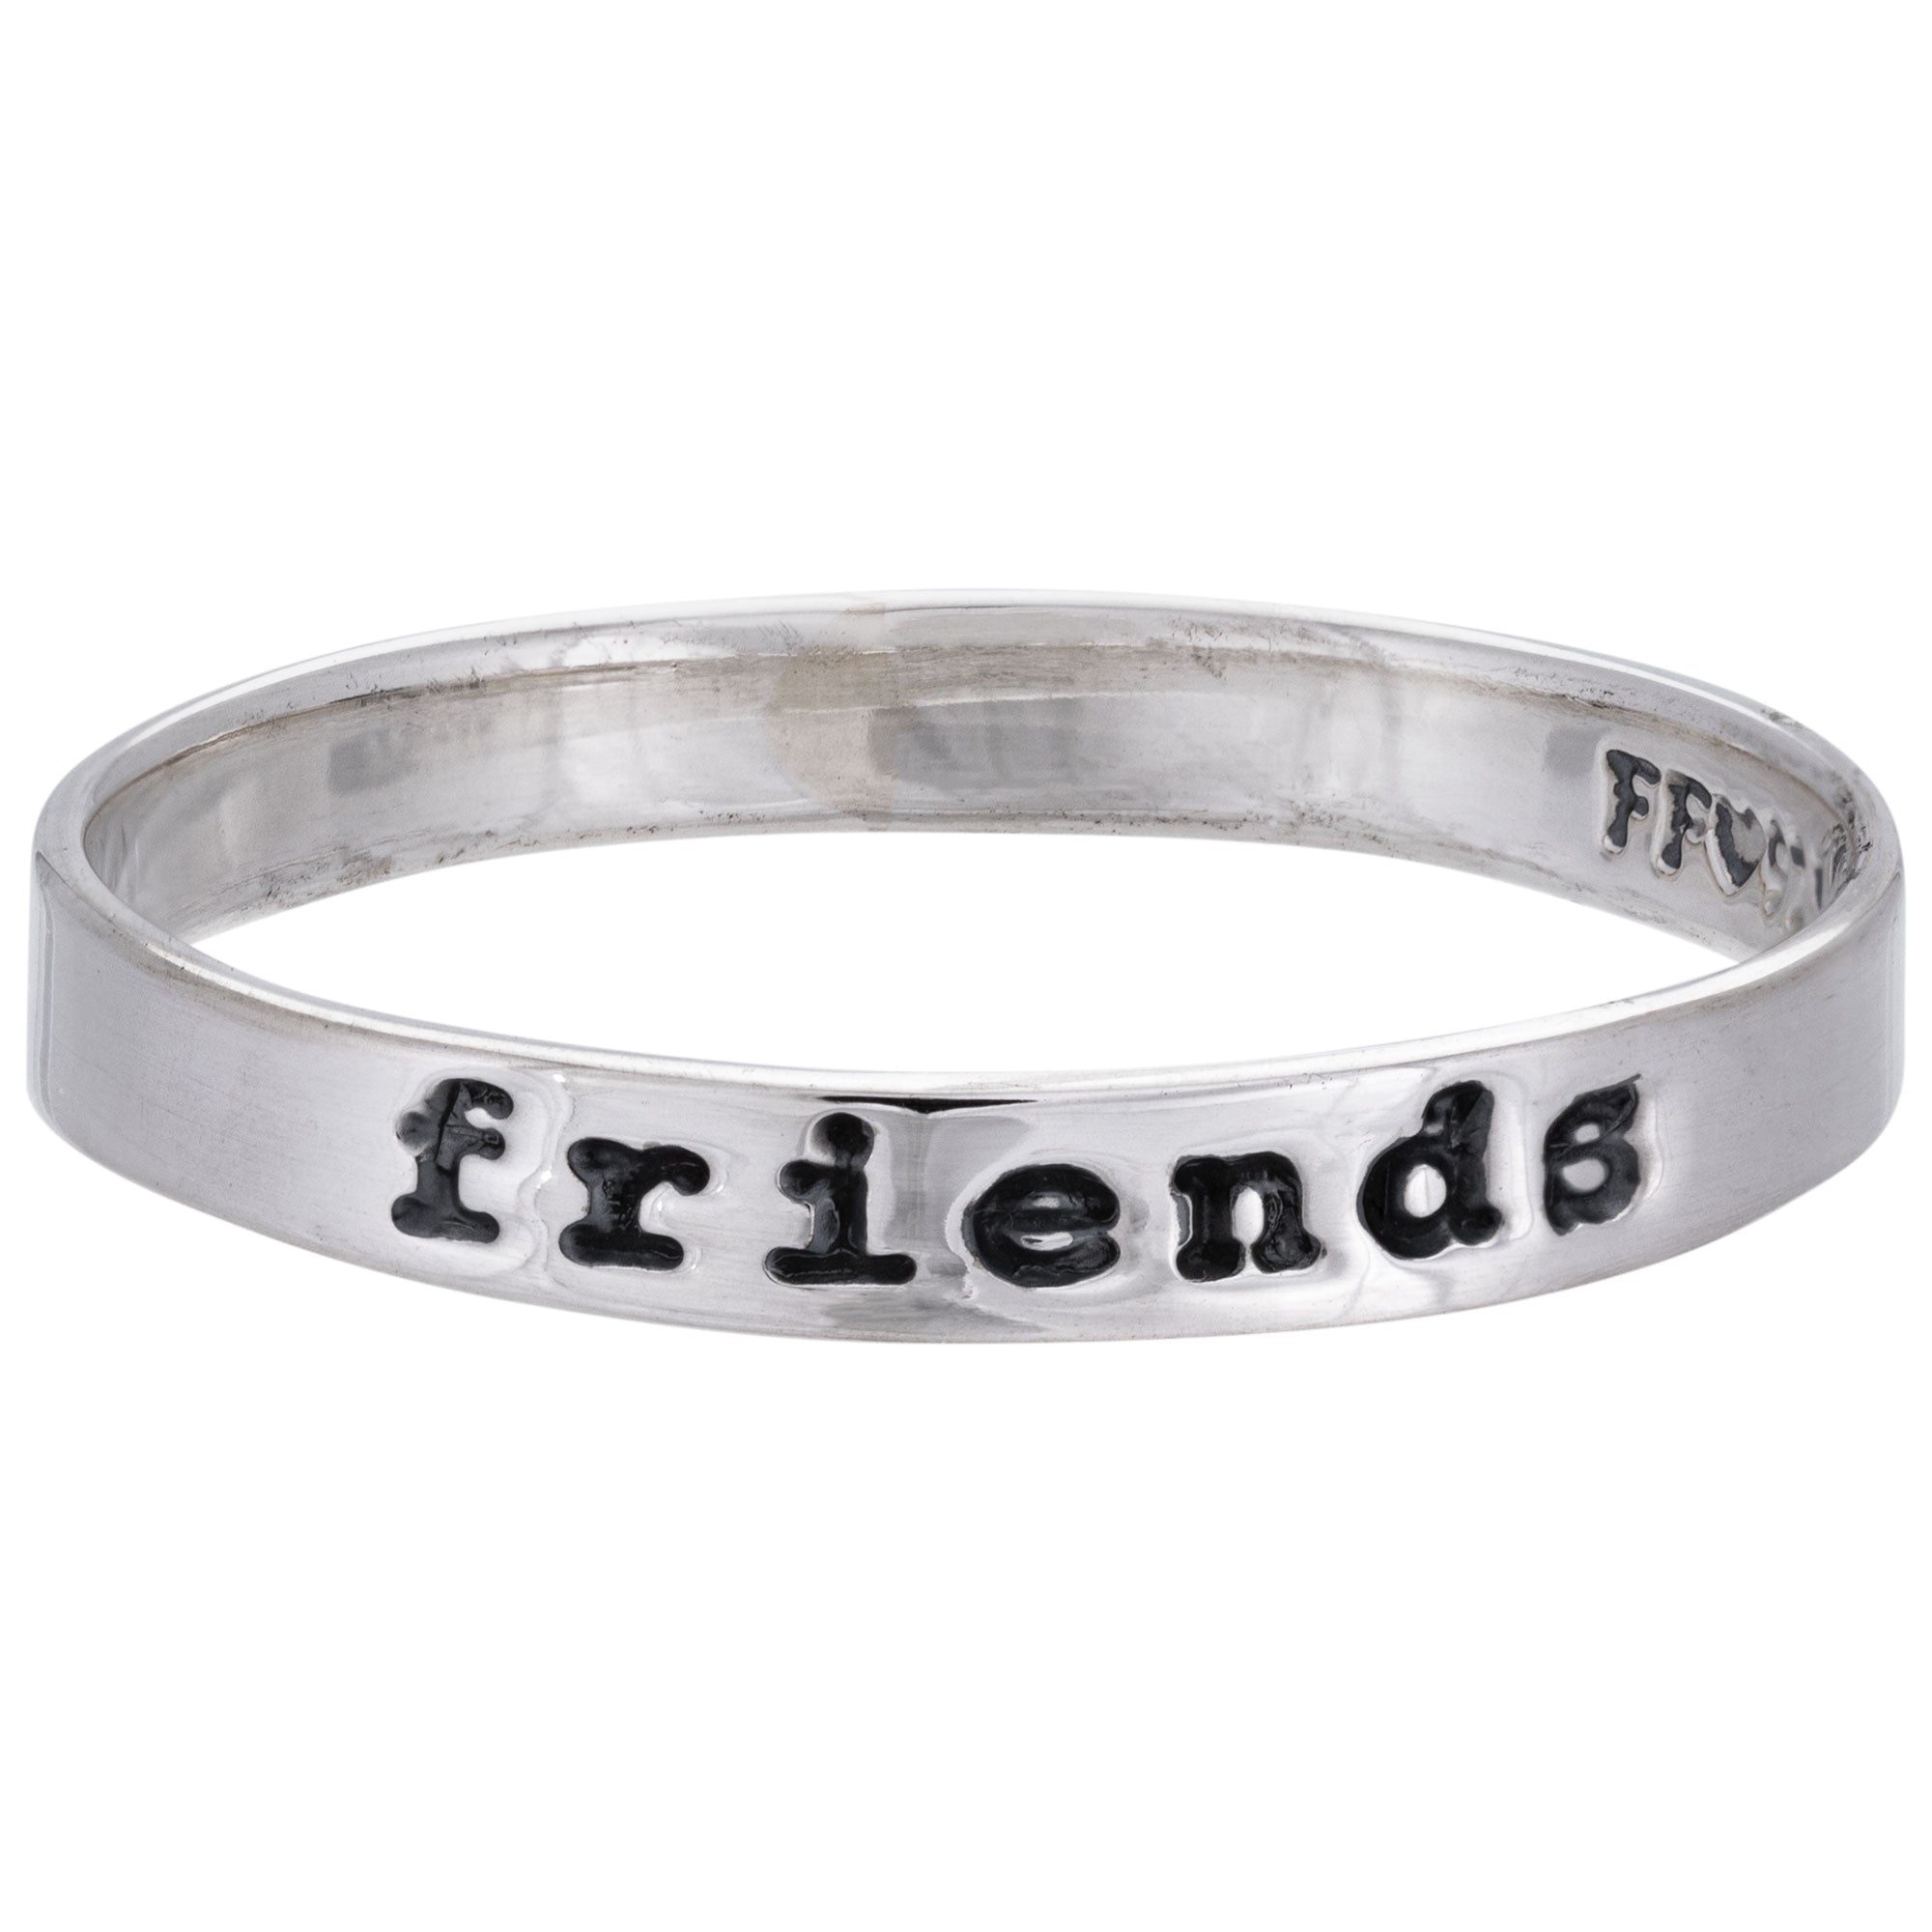 Friends Sterling Silver Ring - 9